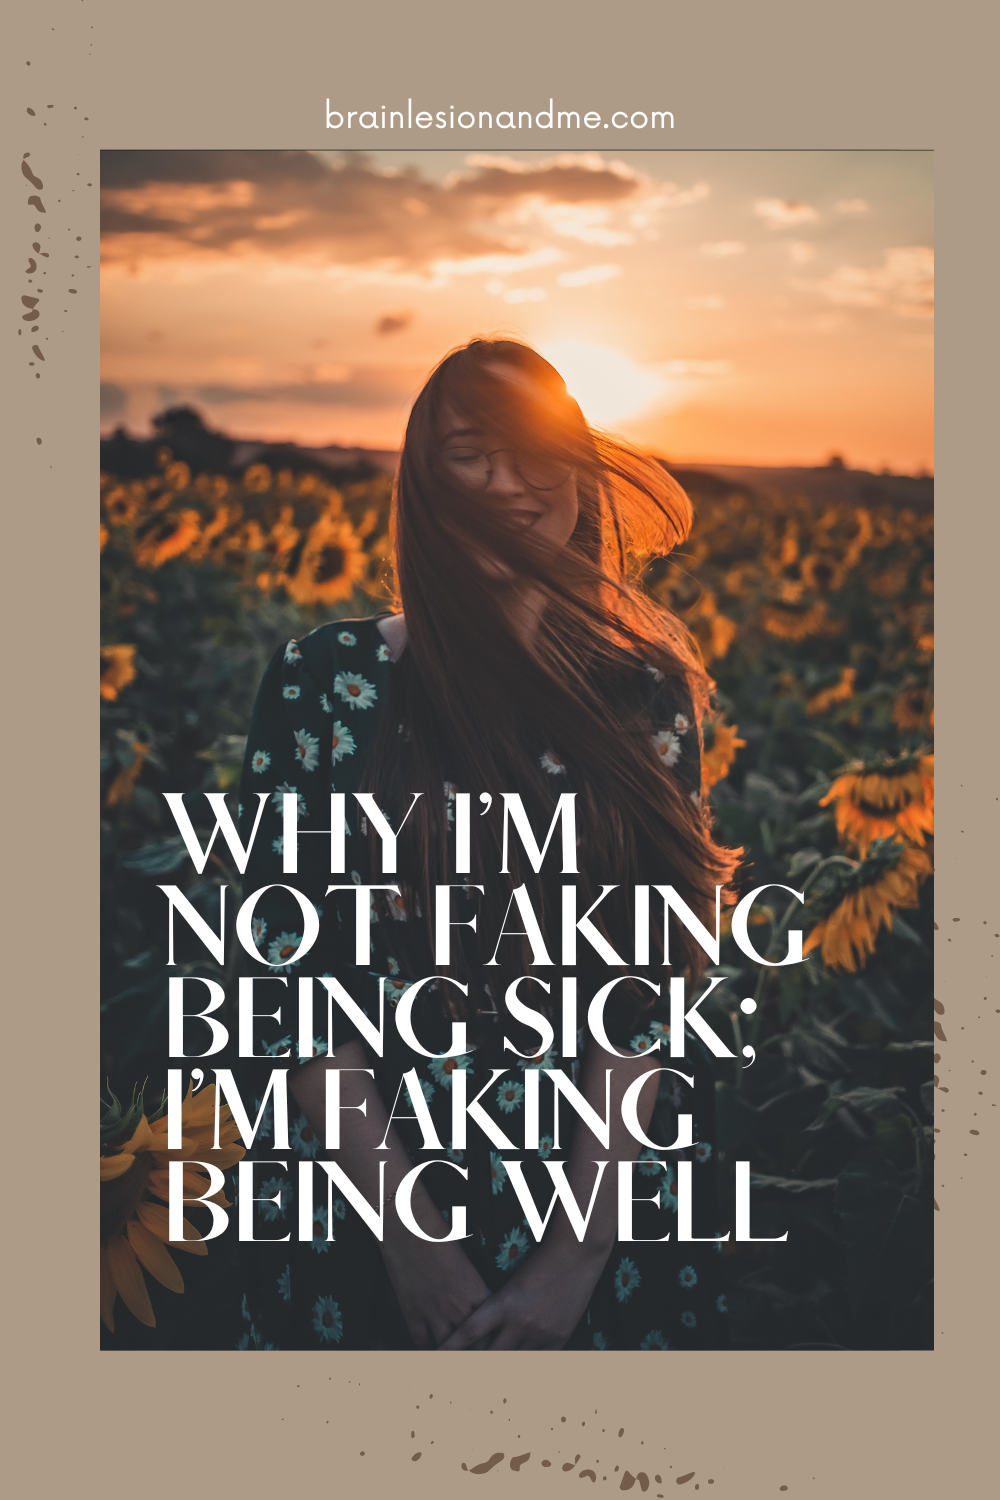 A smiling woman taking at dusk in a field of sunflowers. Text at the bottom reads Why I'm Not Faking Being; I'm Faking Being Well